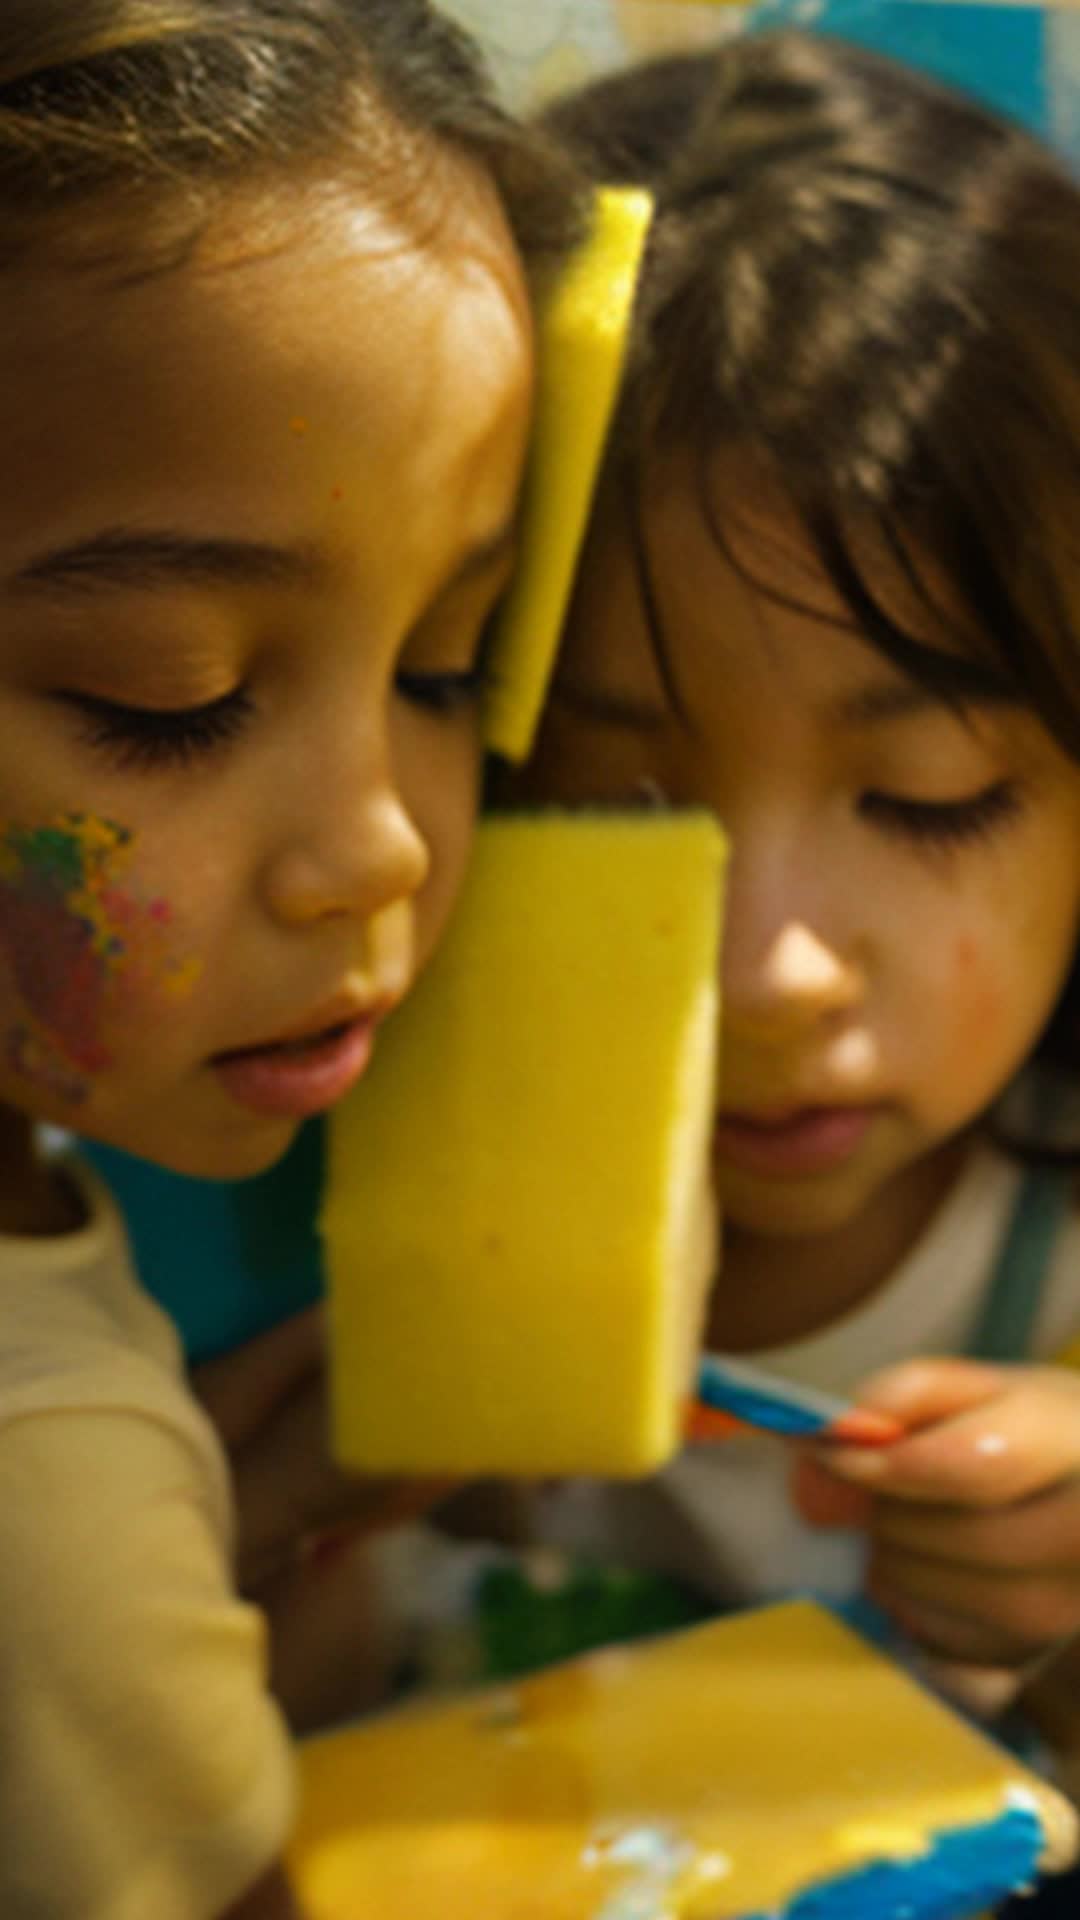 Eager children applying sponge-full of paints to mural, satisfying squish sounds, eager young artist's eyes watching, high detail capture, soft natural light, close-up